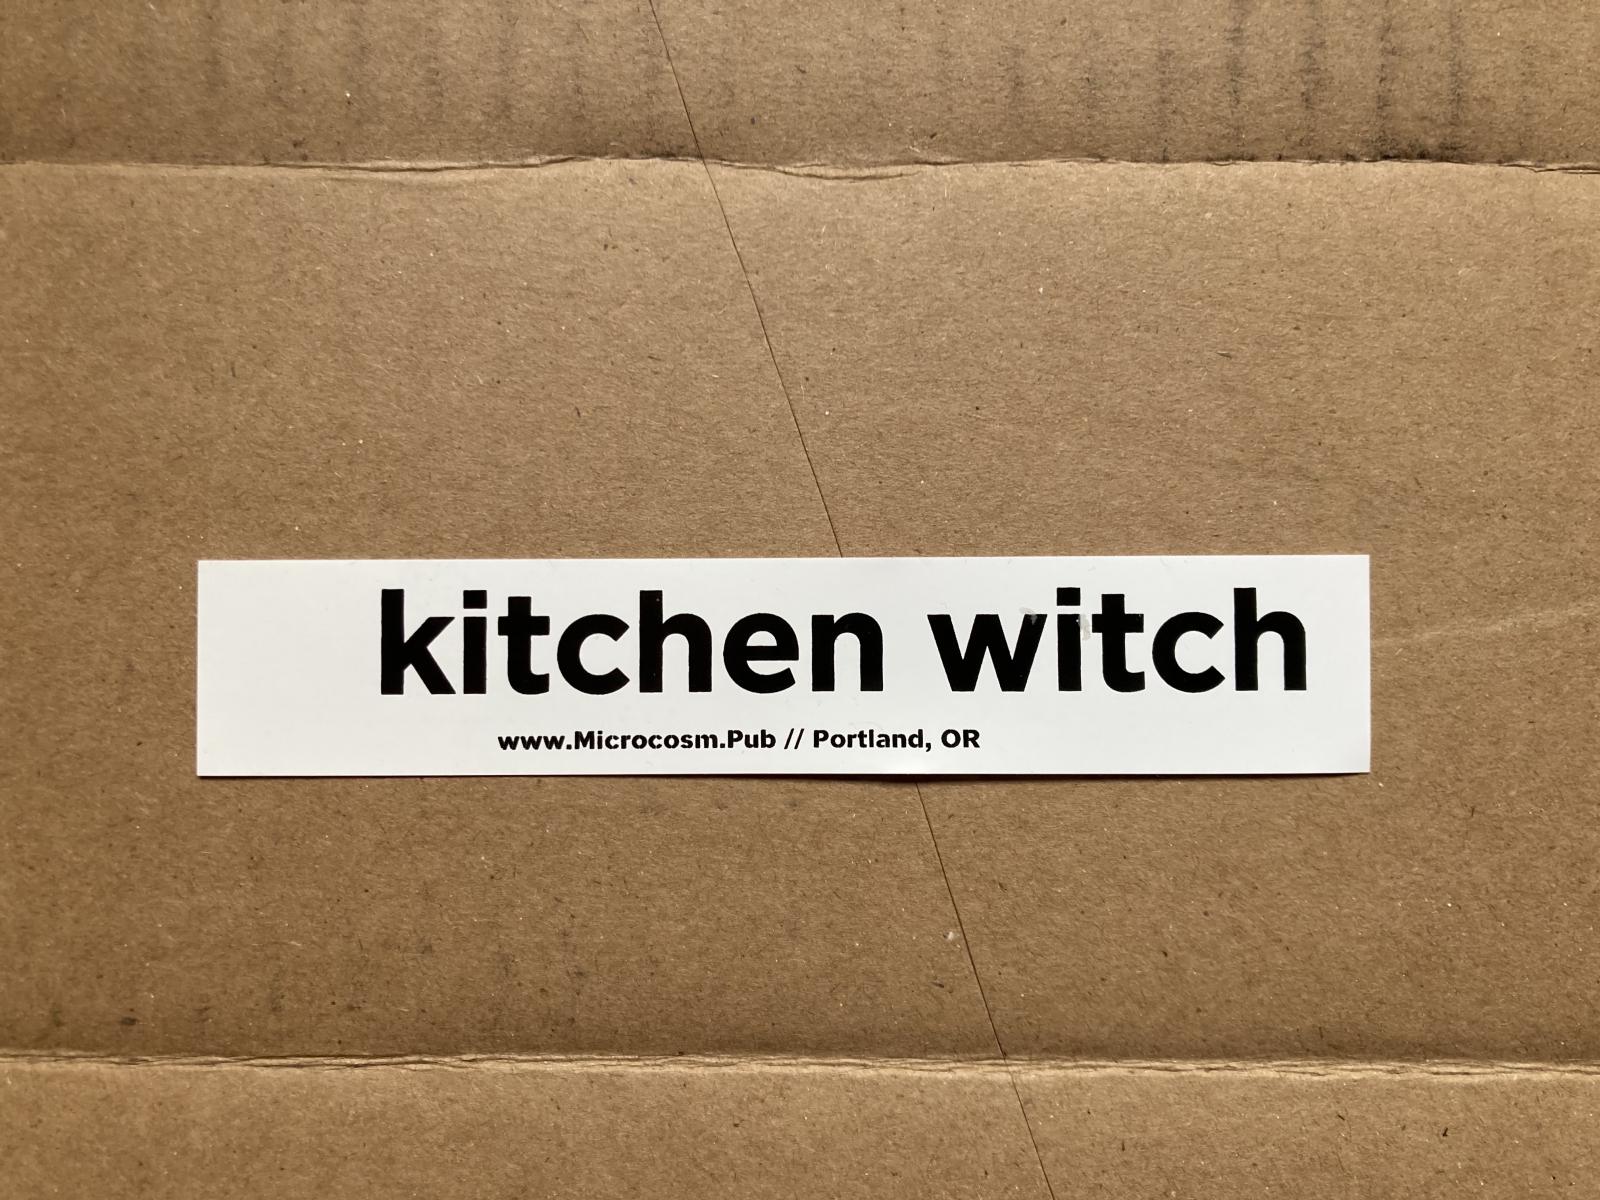 https://microcosmpublishing.com/previews/kitchenwitch_blowup.jpg